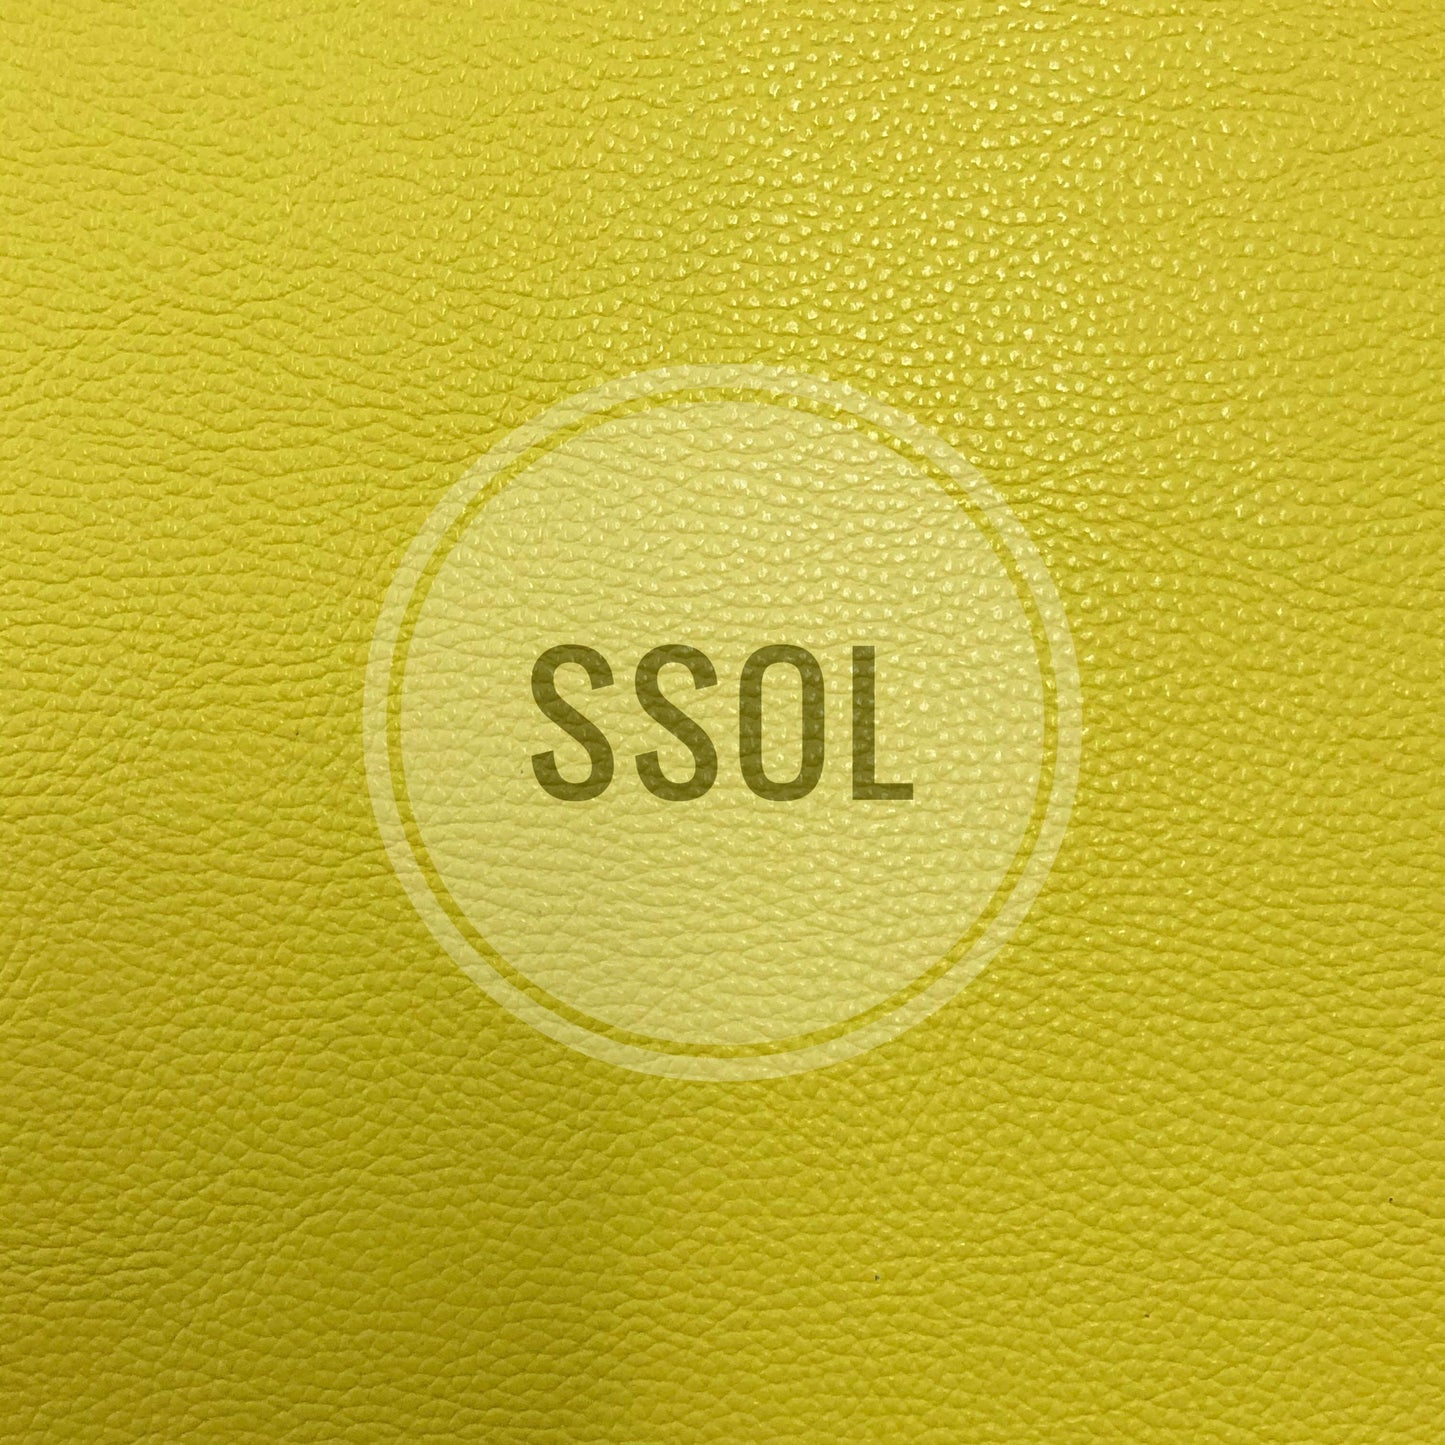 Vinyl/PU Leather - Plain Solids Textured 01 (Bright Yellow)